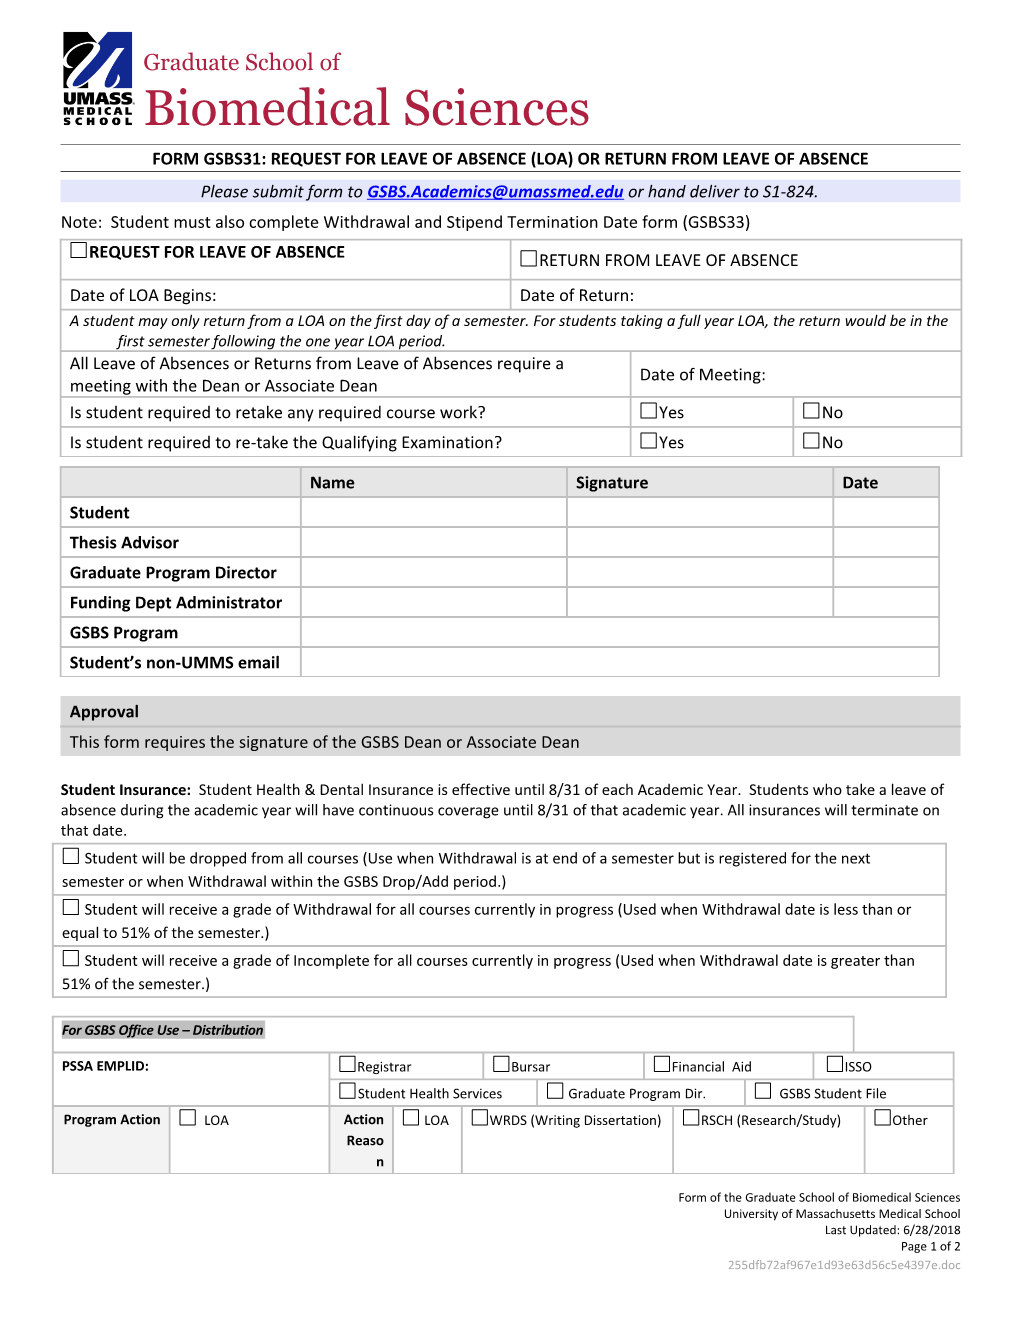 Form Gsbs31: Request for Leave of Absence (Loa) Or Return from Leave of Absence